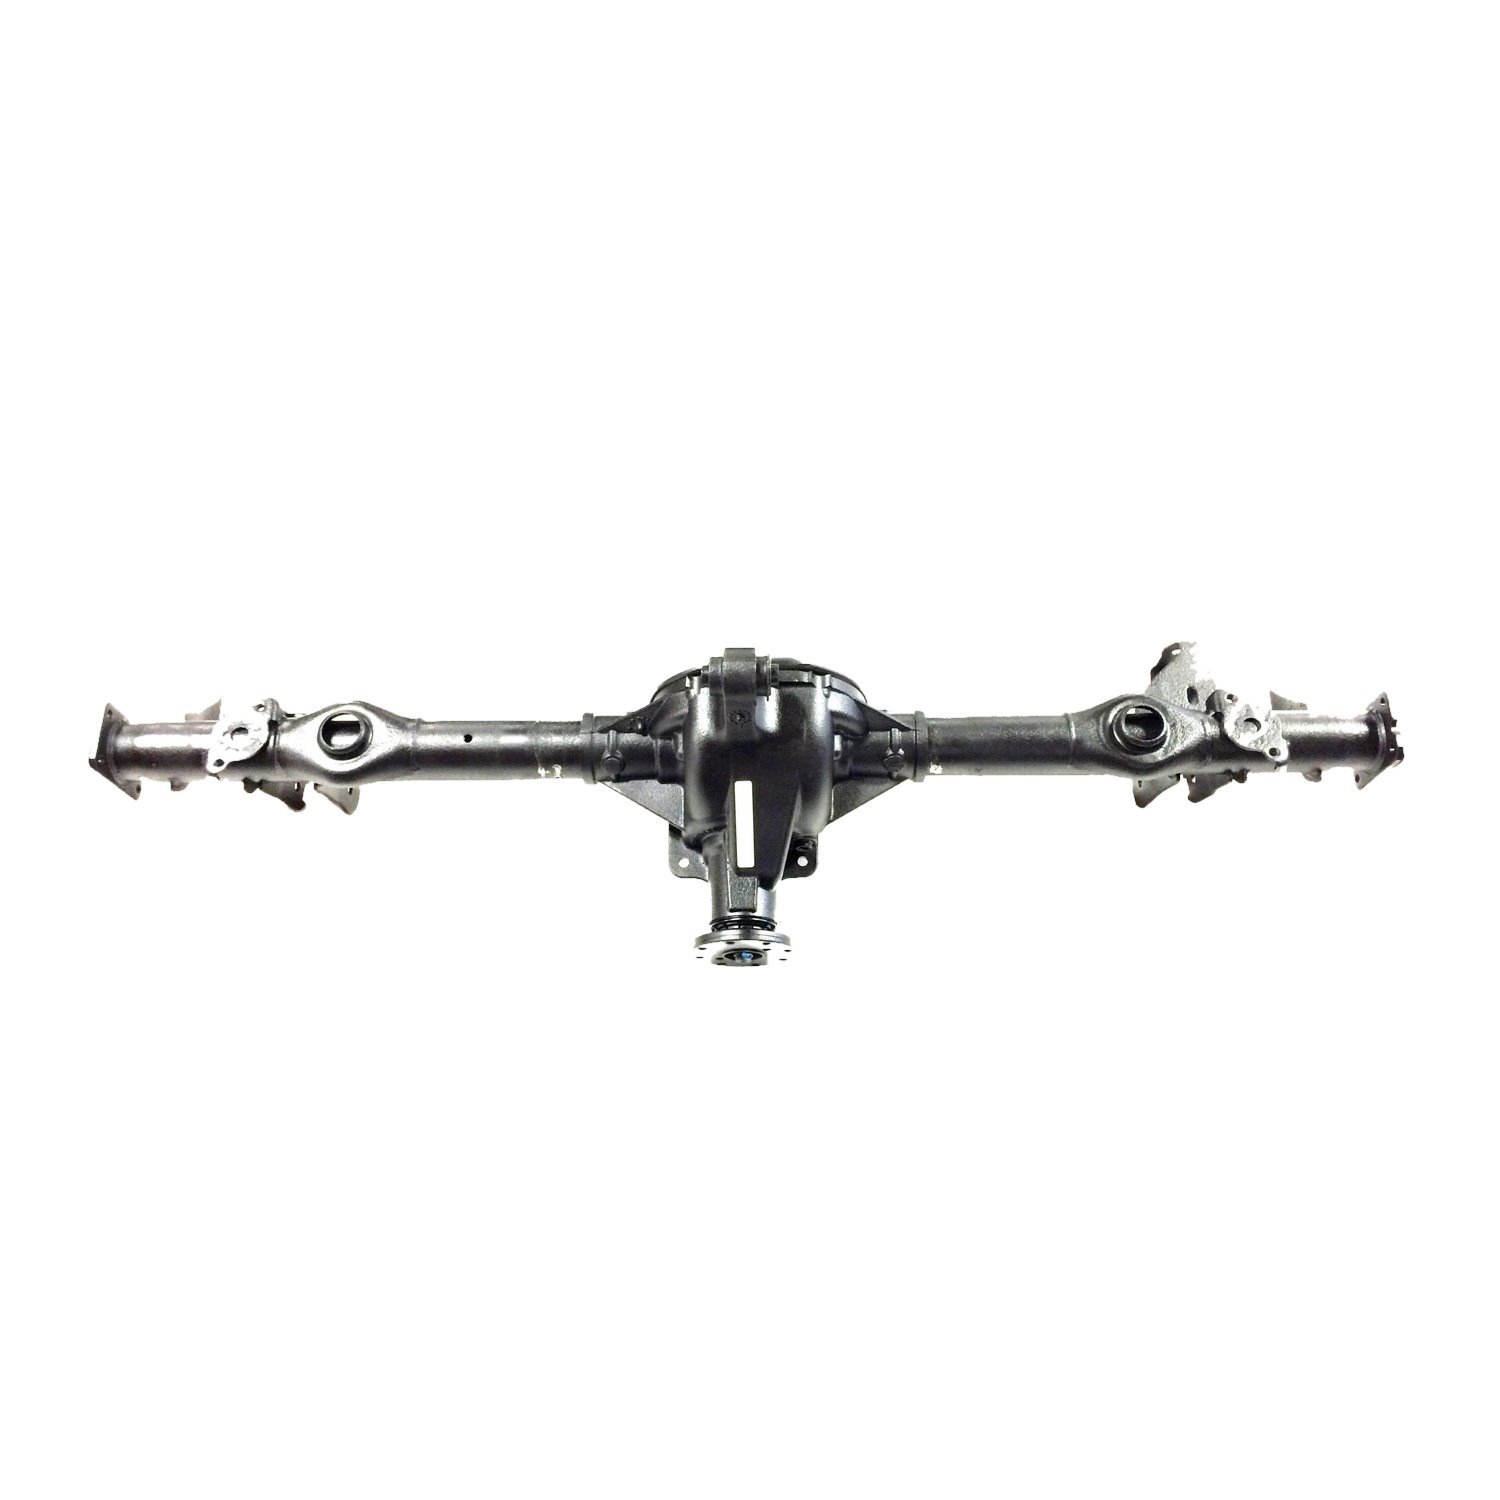 Reman Axle Assembly, For Ford 8.8 in., 2018-20 F-150 W/ 3.3L, 3.55 Ratio, Open